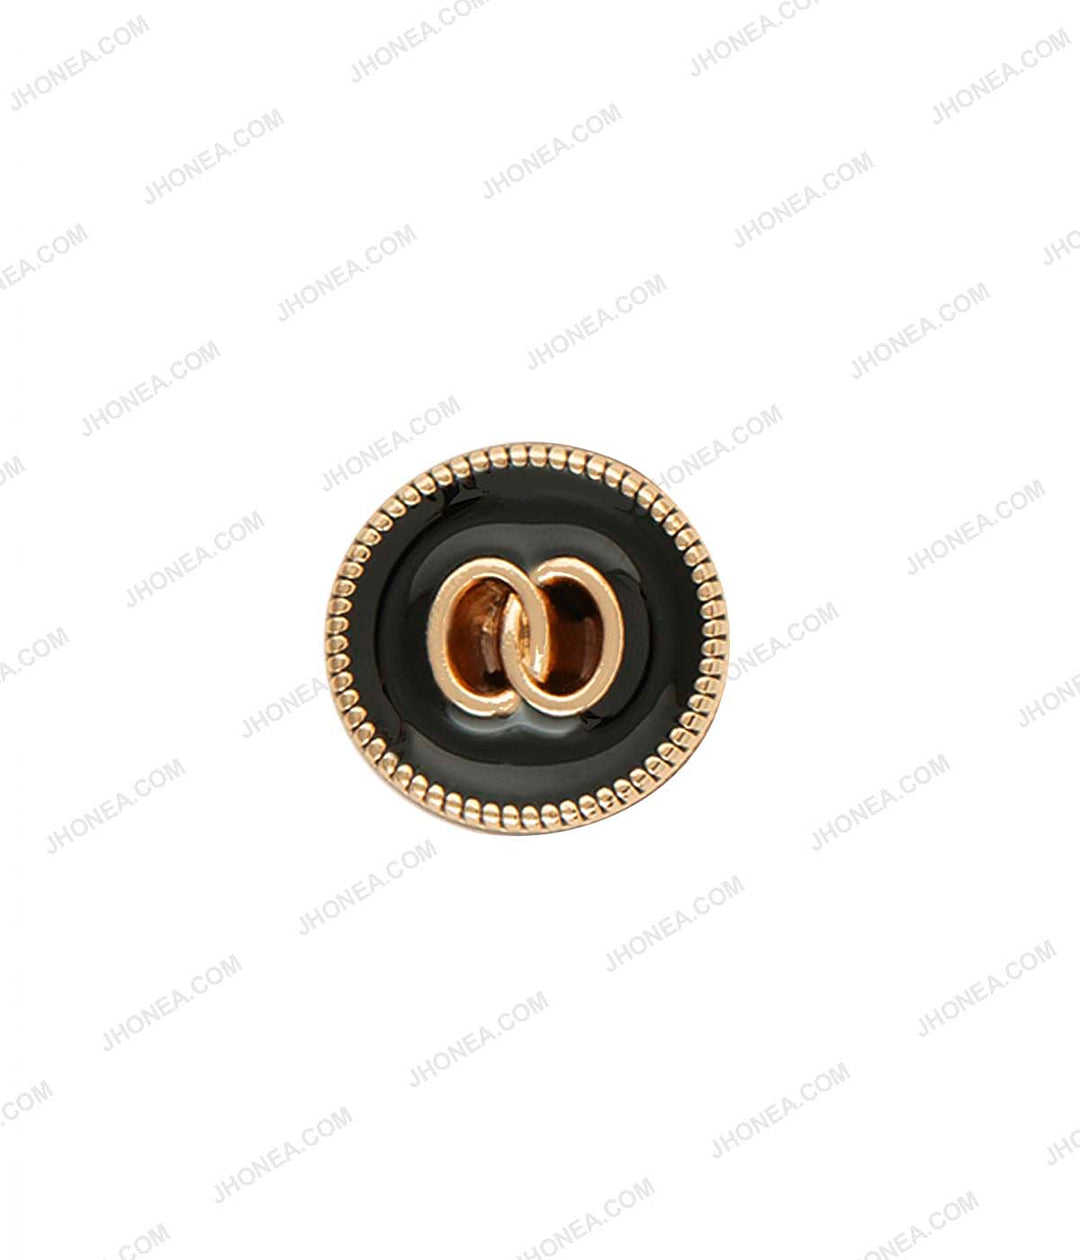 Fancy Decorative Enamel Surface 10mm (16L) Party Wear Shirt Buttons in Gold with Black Color